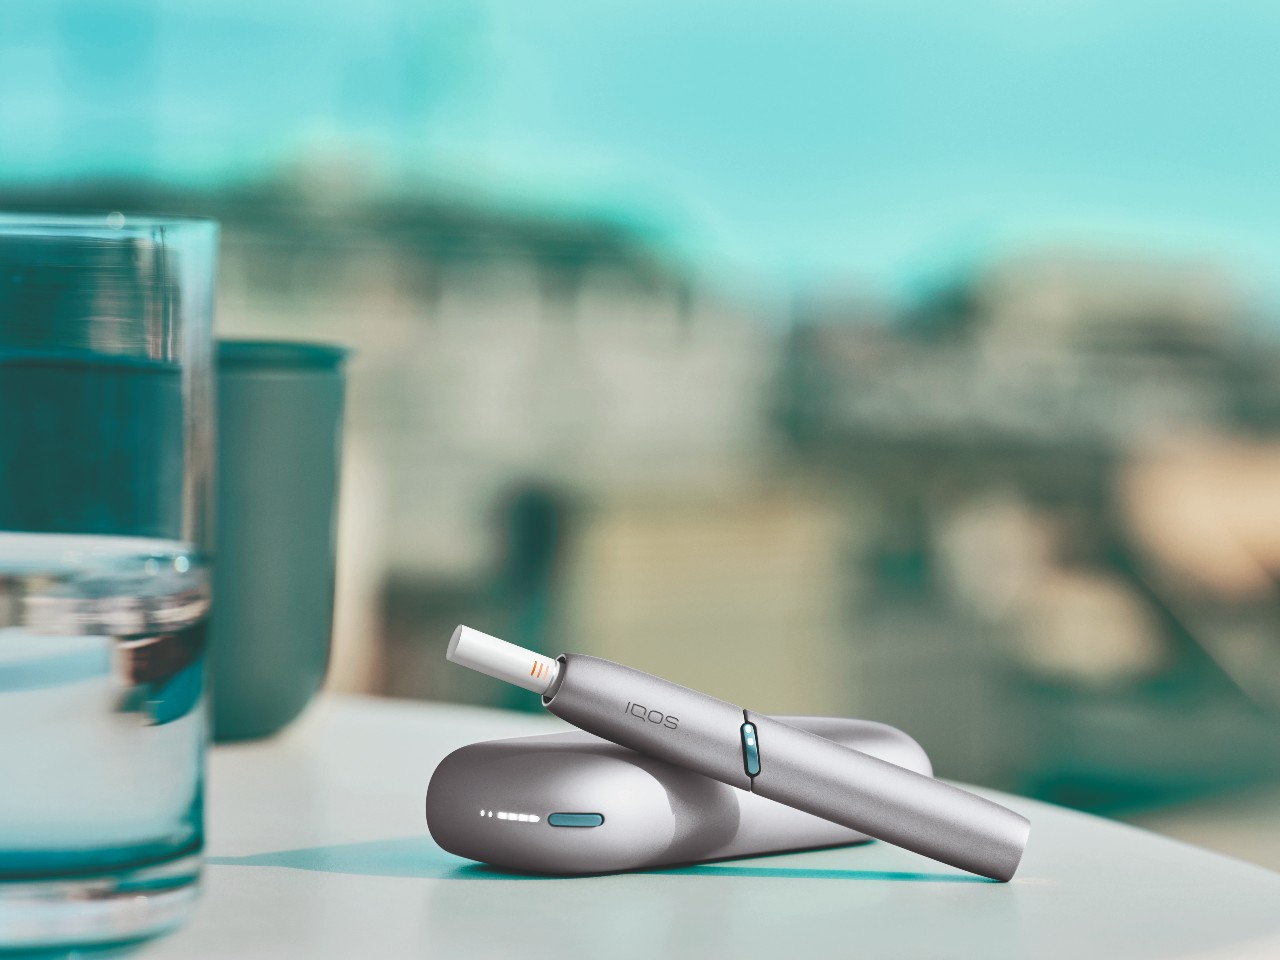 Iqos replaces 3 Duo device with Originals Duo - Better Retailing